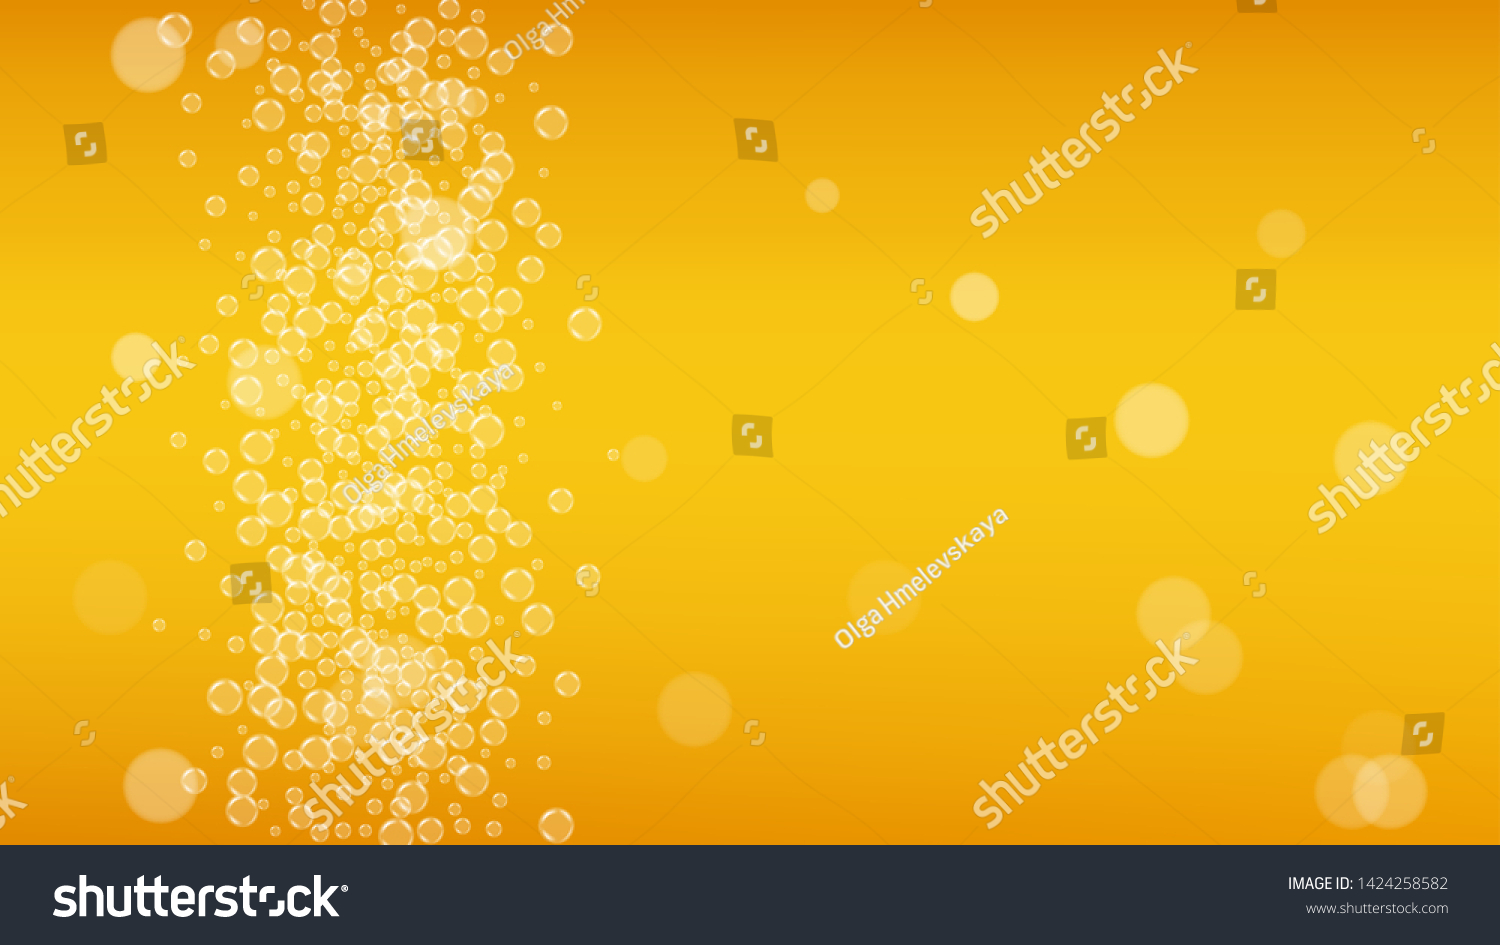 Splash Beer Background For Craft Lager Royalty Free Stock Vector 1424258582